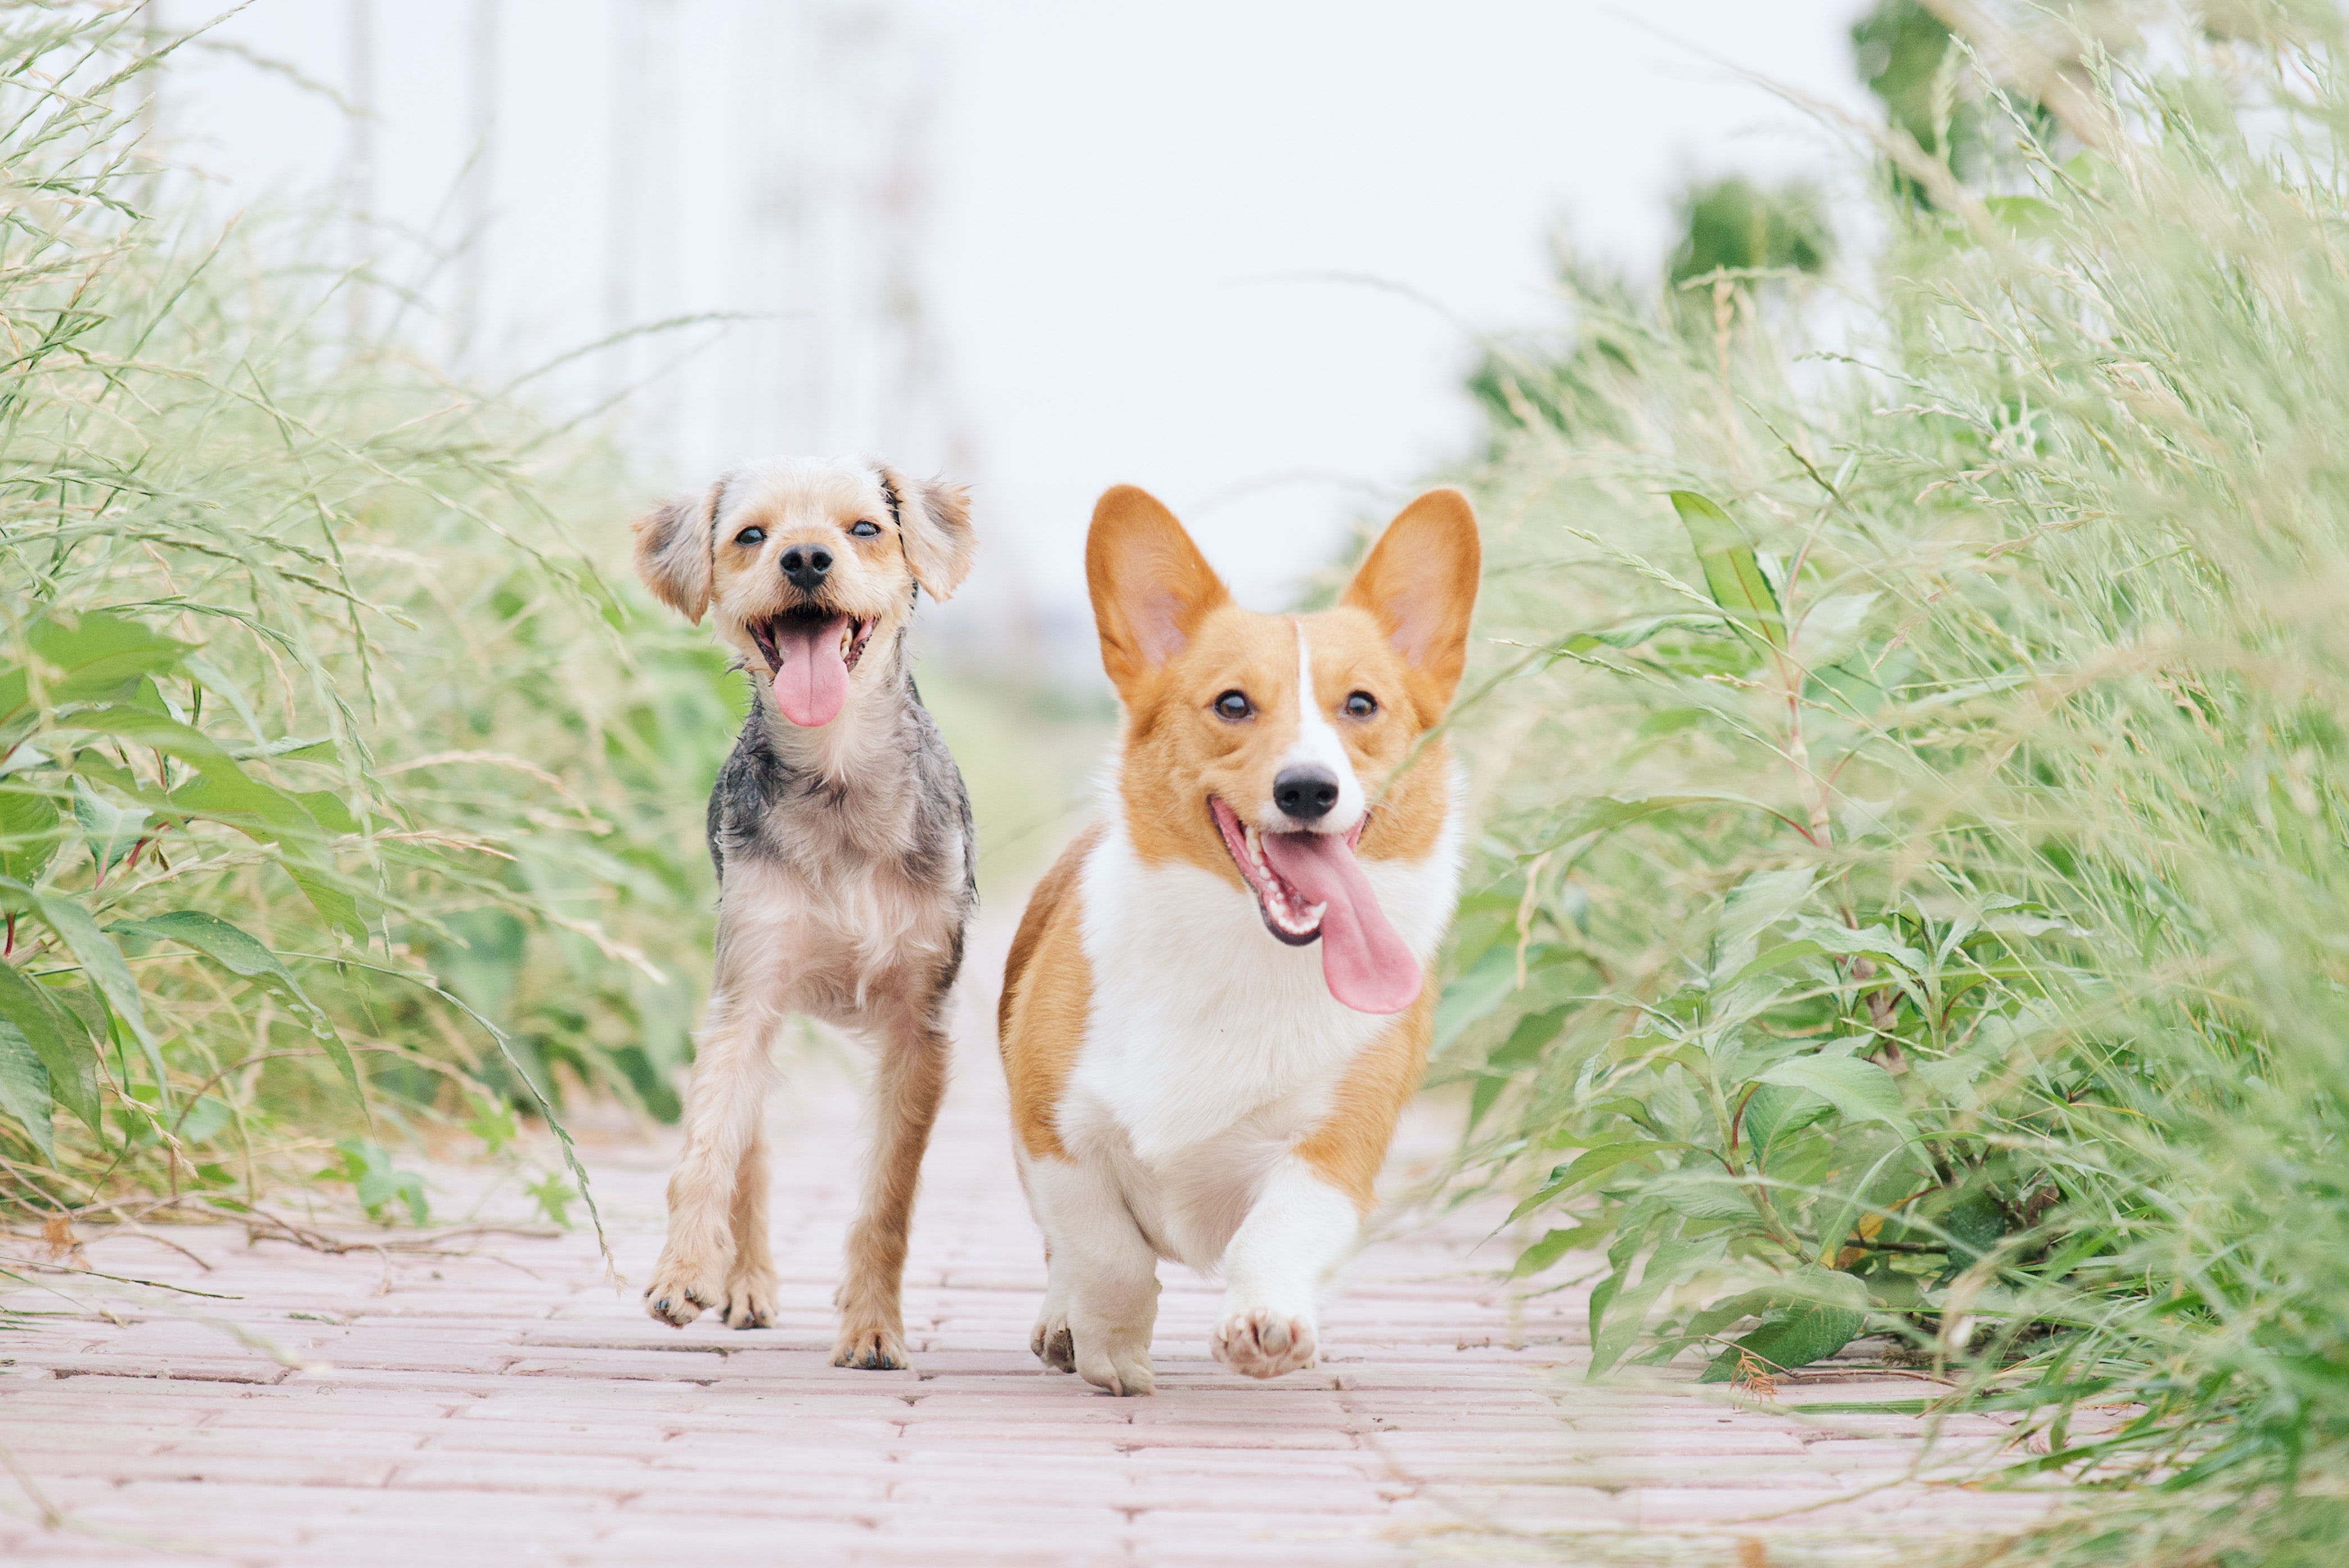 Buddy Time! NYC, LLC - Your Trusted Personal Dog Walker